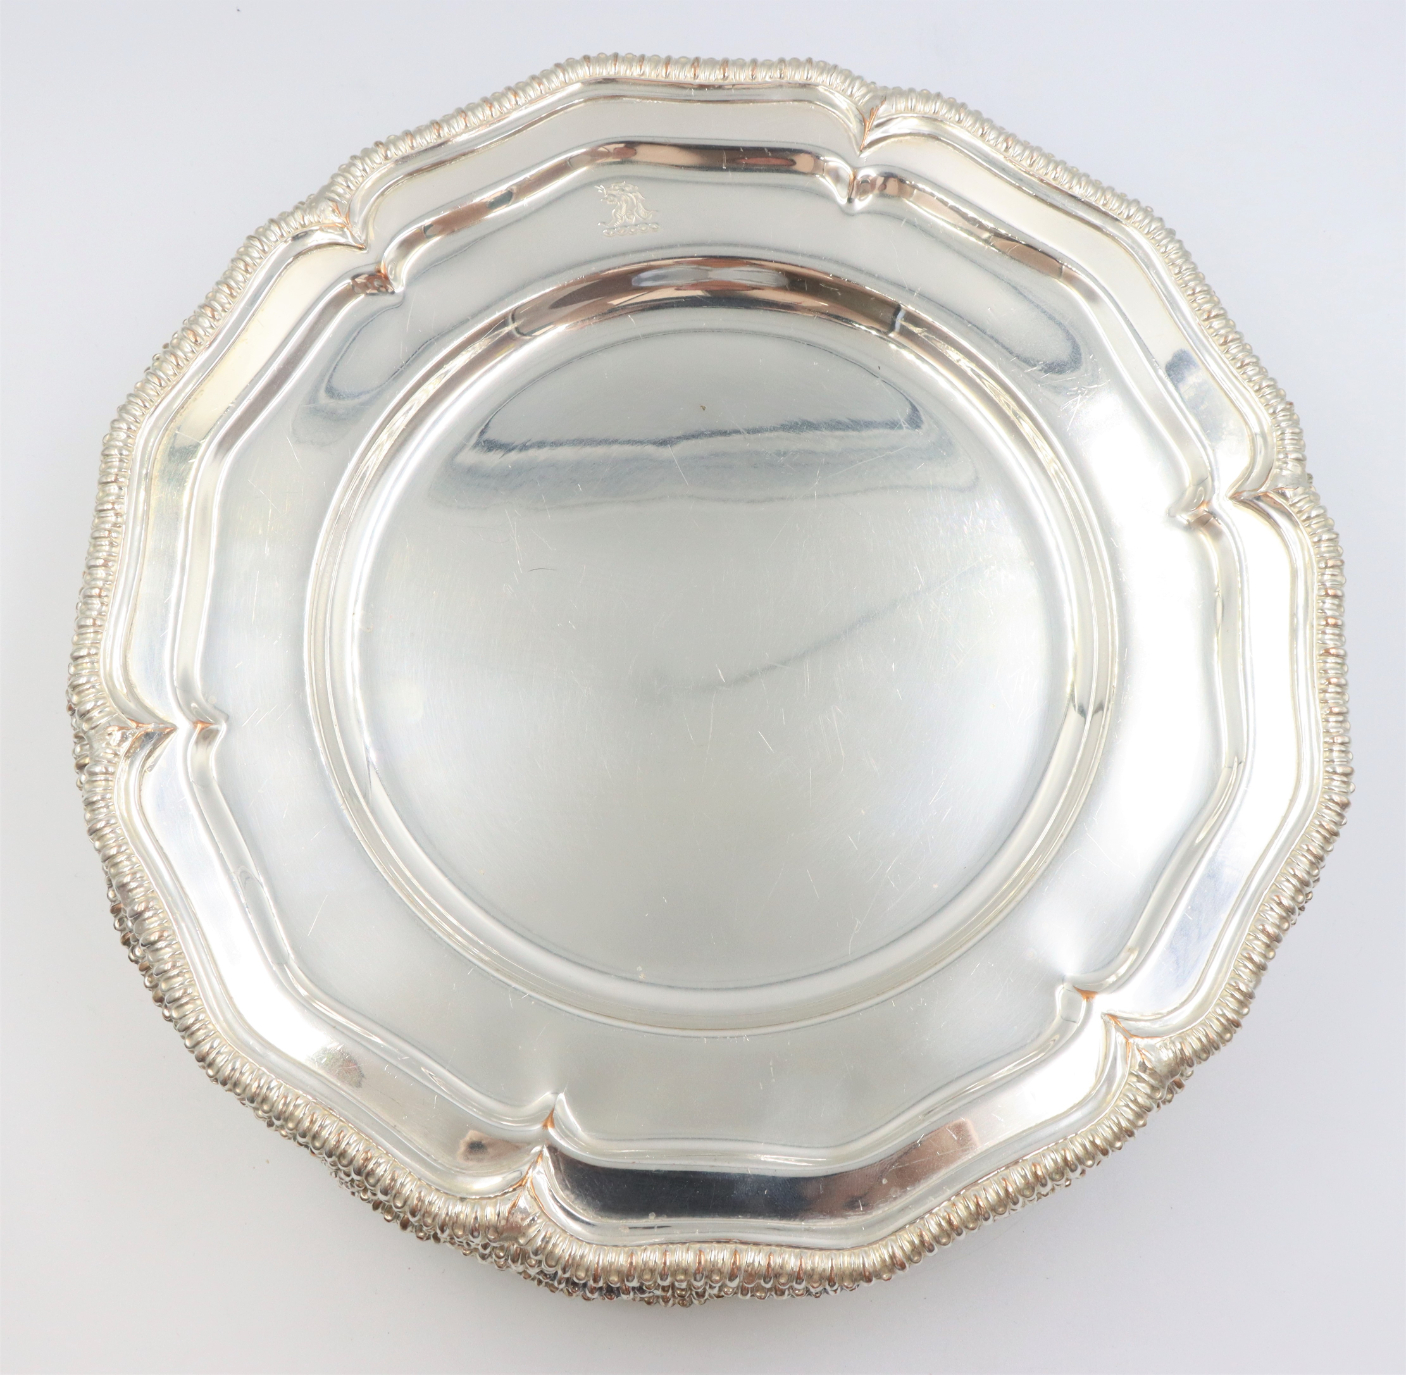 (12) Sheffield Silver Plate Service Plates - Image 5 of 10